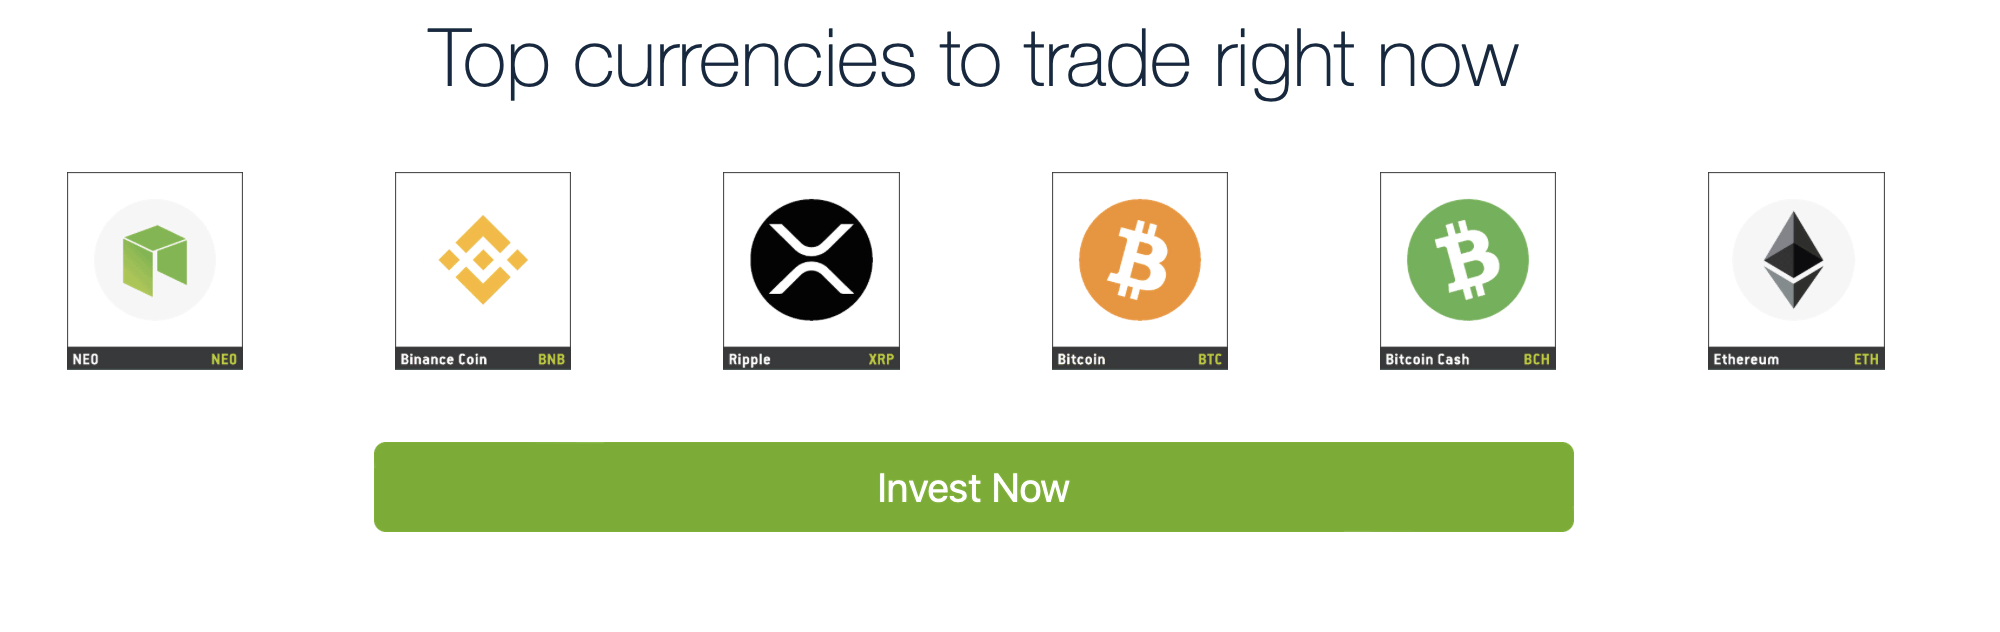 Tradable cryptocurrencies on Bitcoin Pro